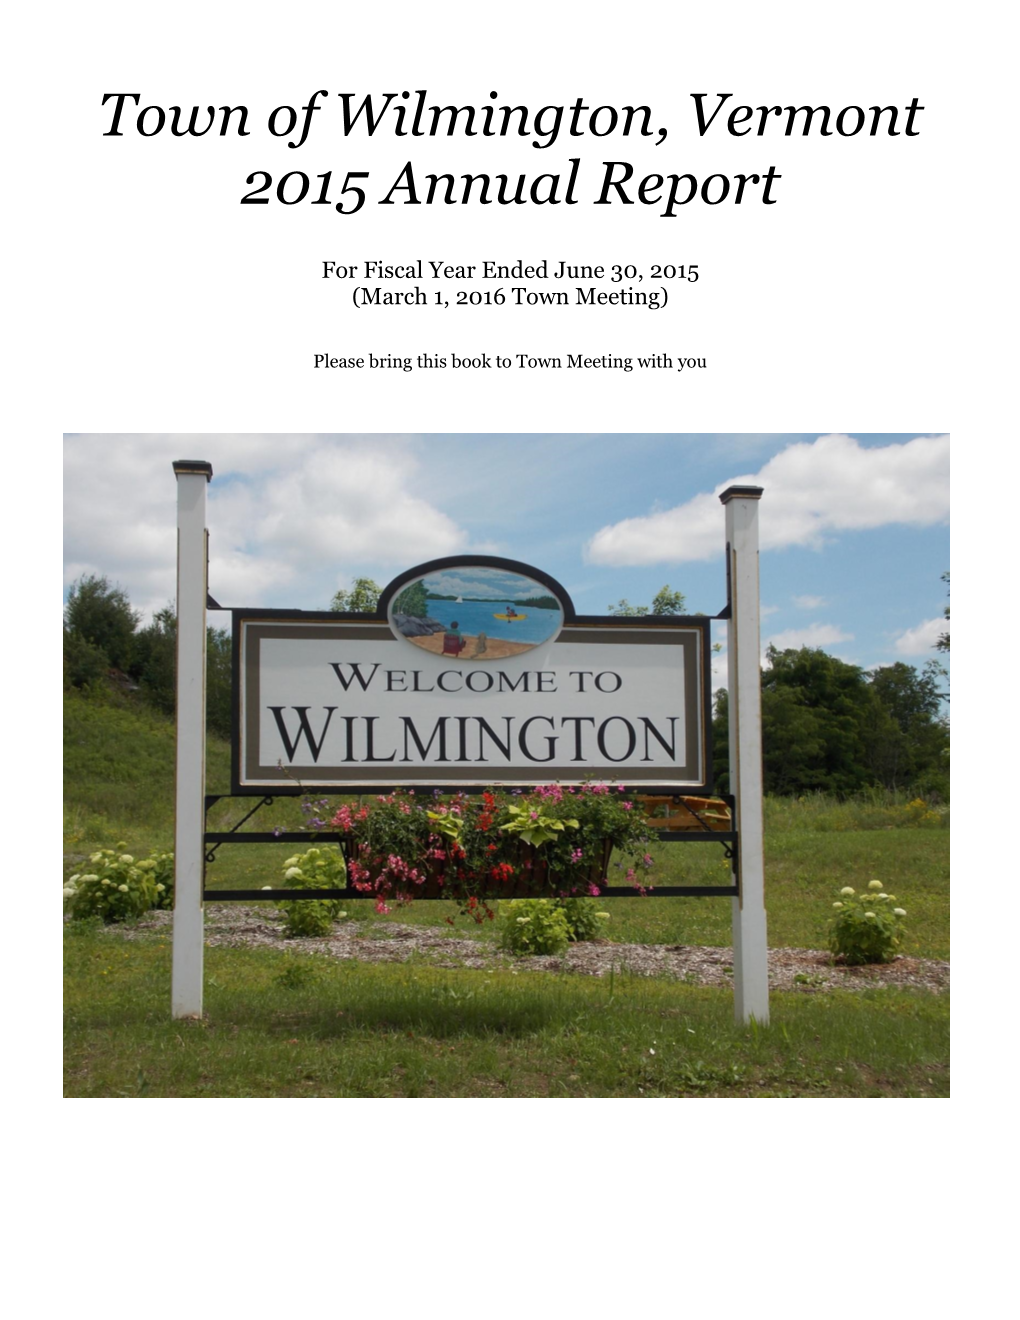 Town of Wilmington, Vermont 2015 Annual Report